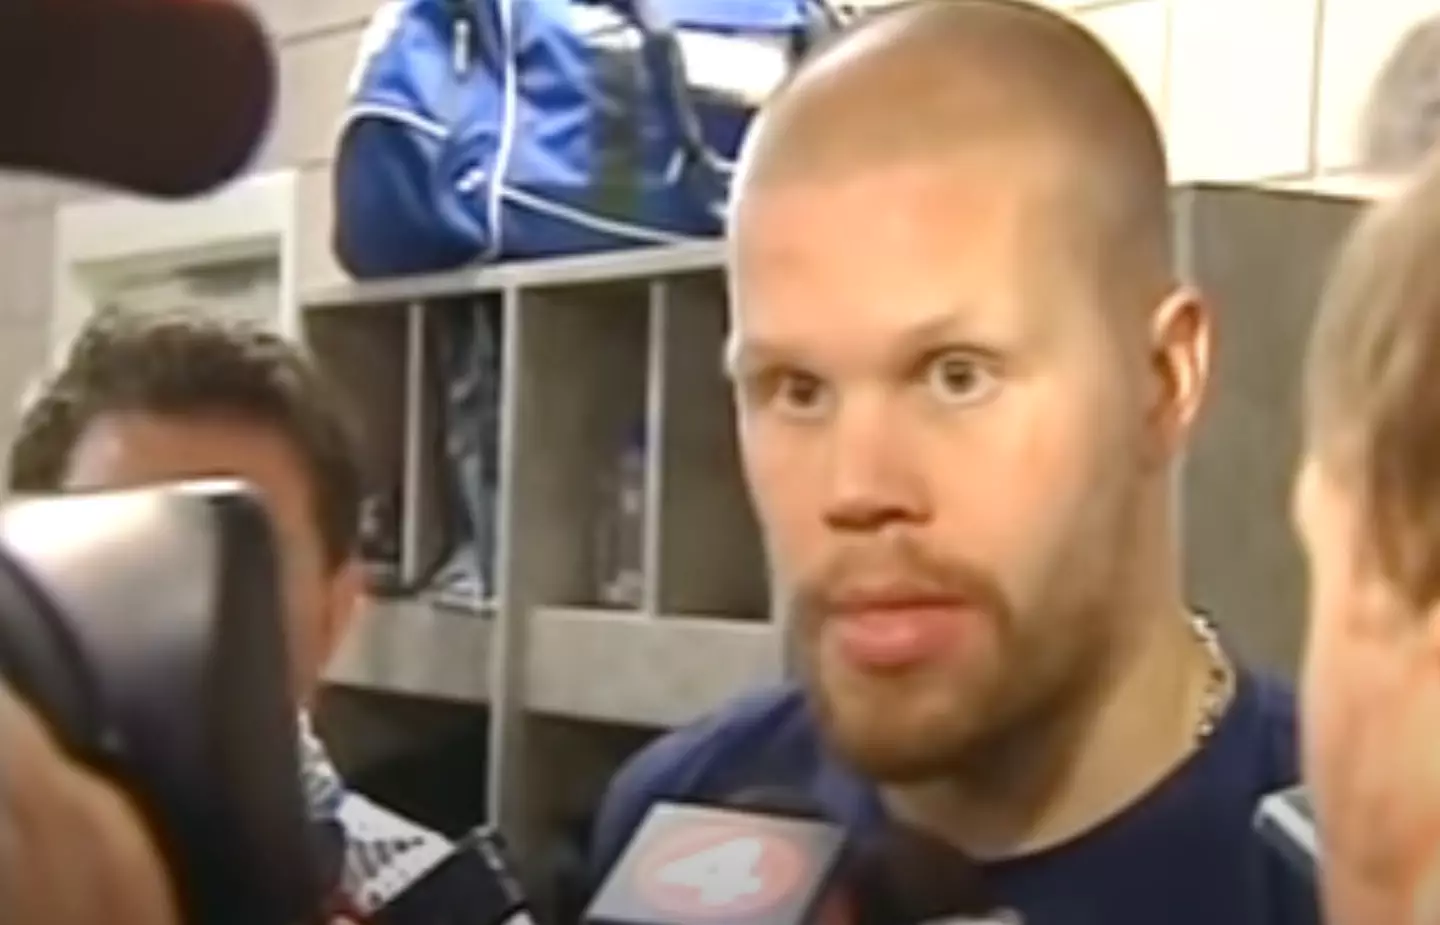 Jokinen was not impressed by the question.